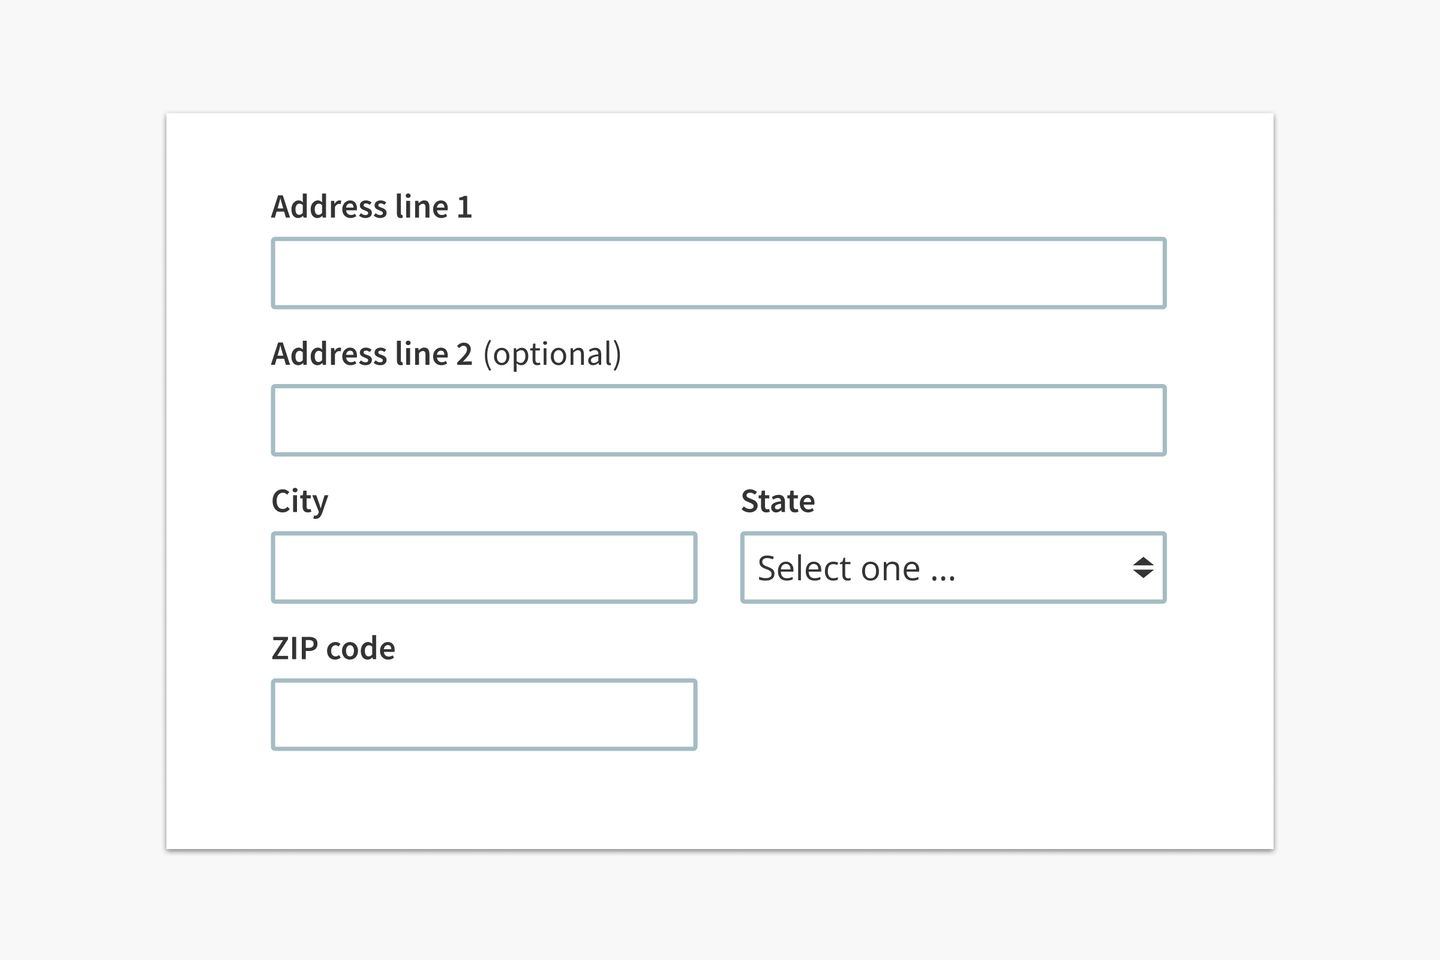 Webform with address, city, state, and ZIP code fields